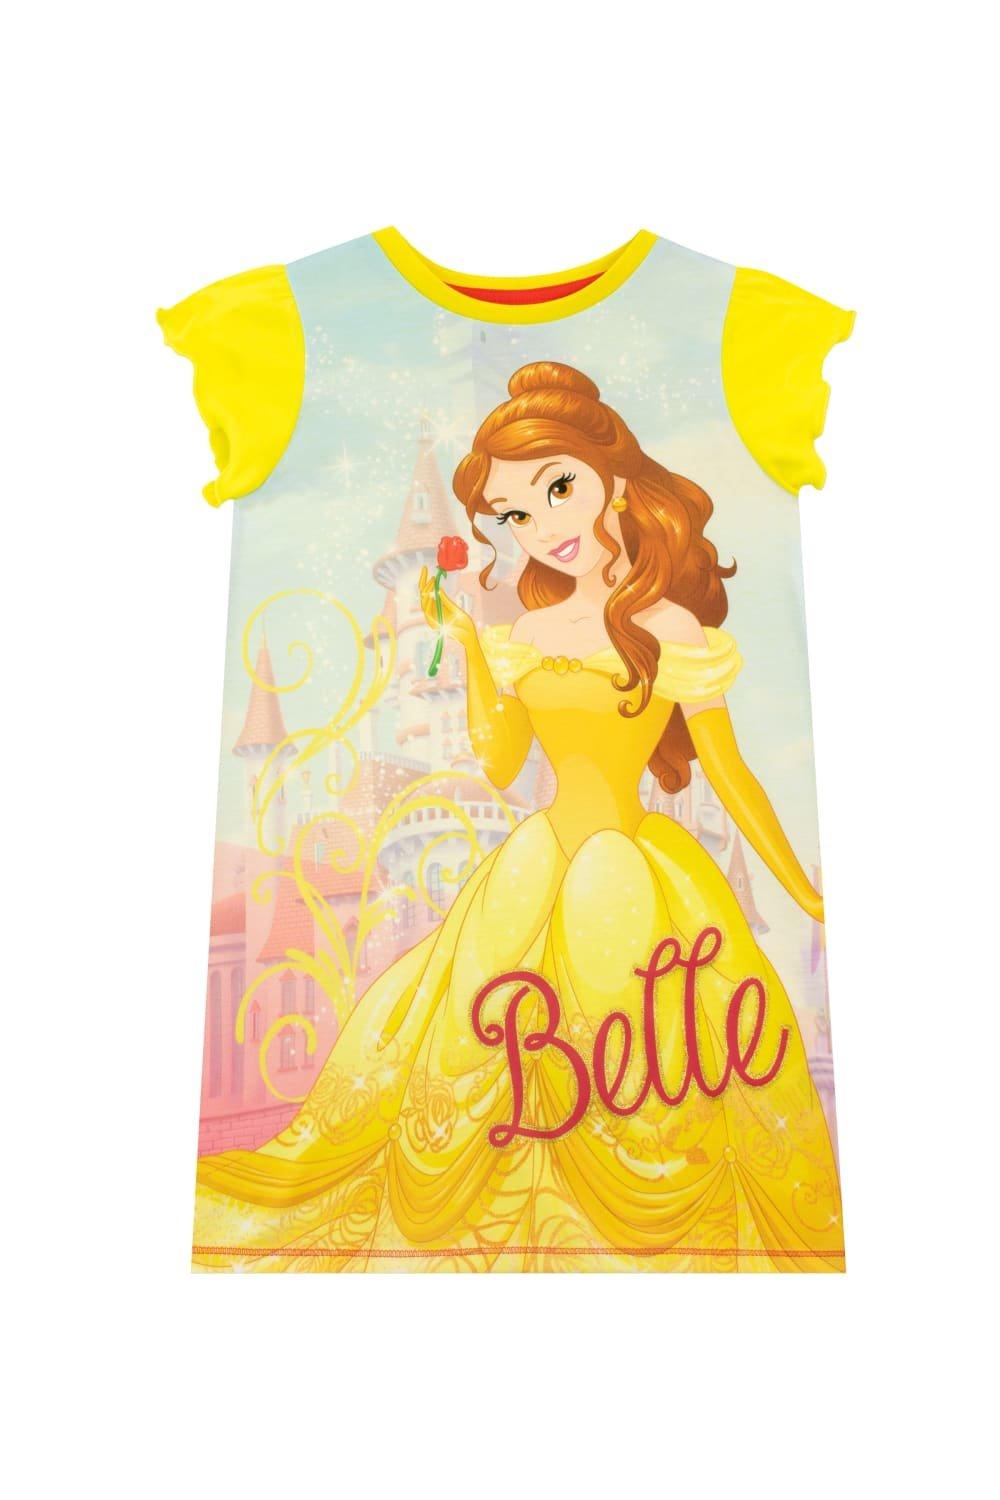 Beauty and the Beast Belle Nightdress